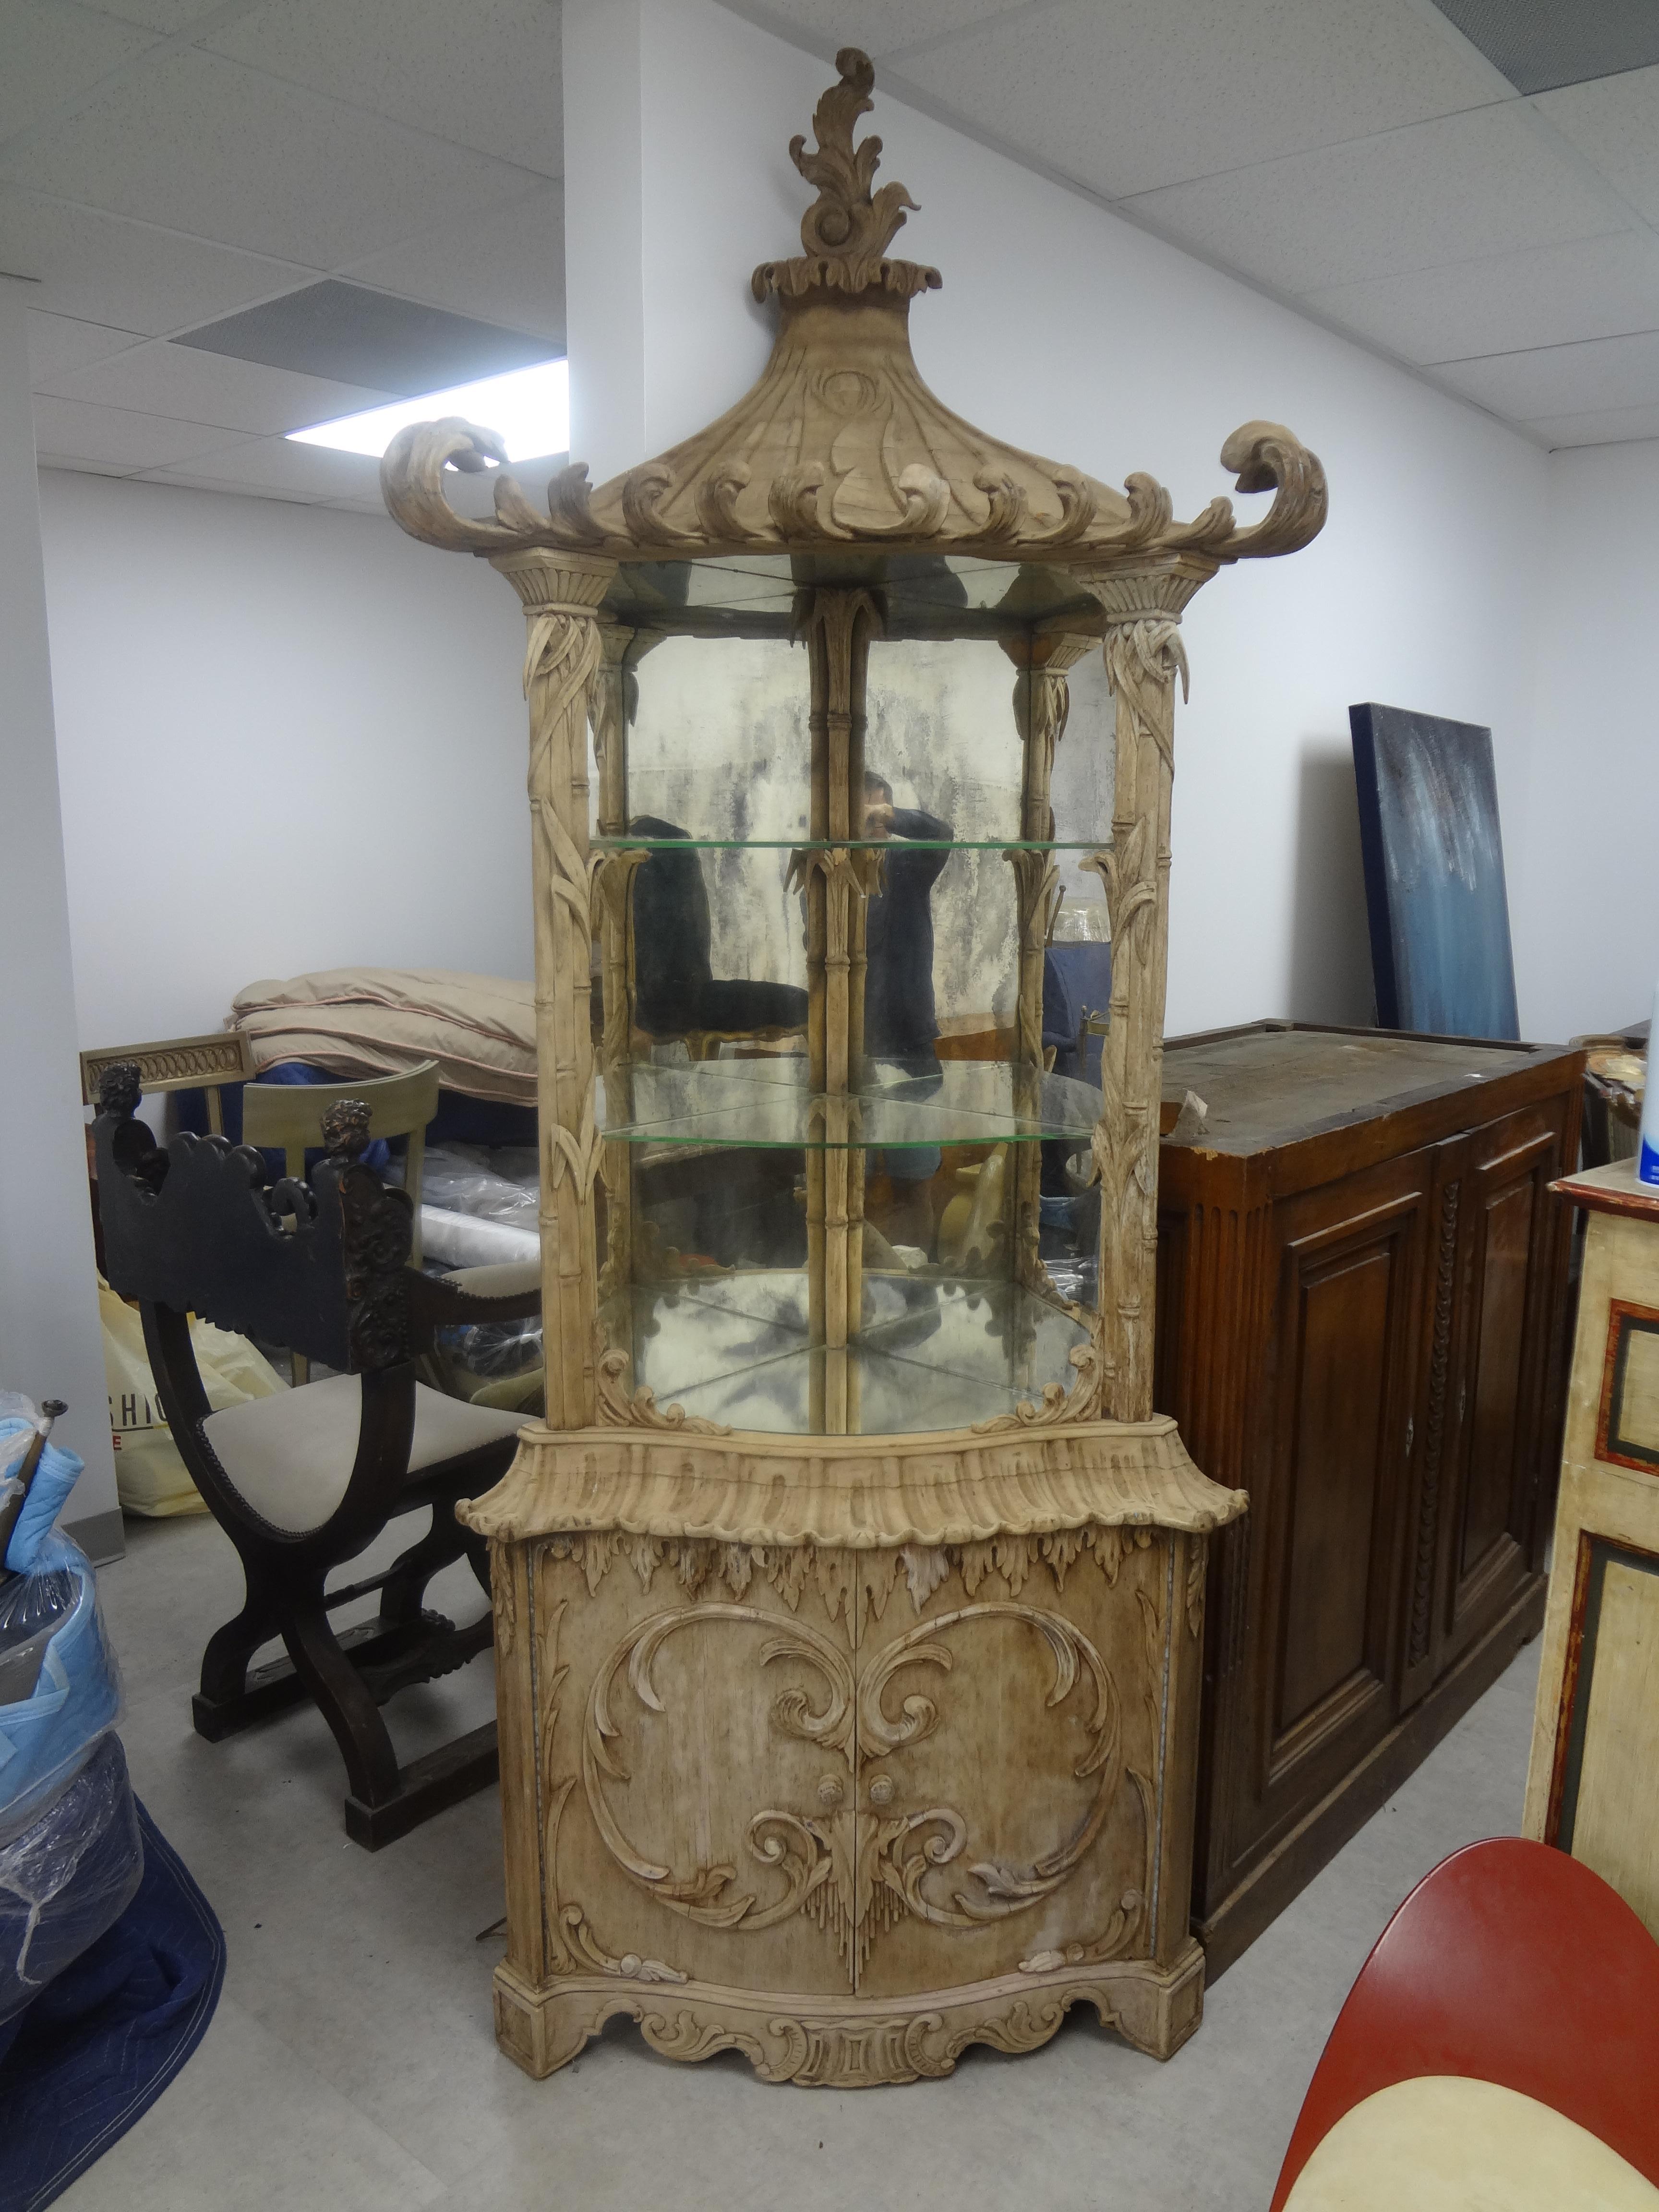 Chinese Chippendale pagoda corner cabinet. This sensational early 20th century continental carved bleached wood chinoiserie pagoda cabinet has a mirrored display area with glass shelves at the top with storage below. This stunning versatile cabinet